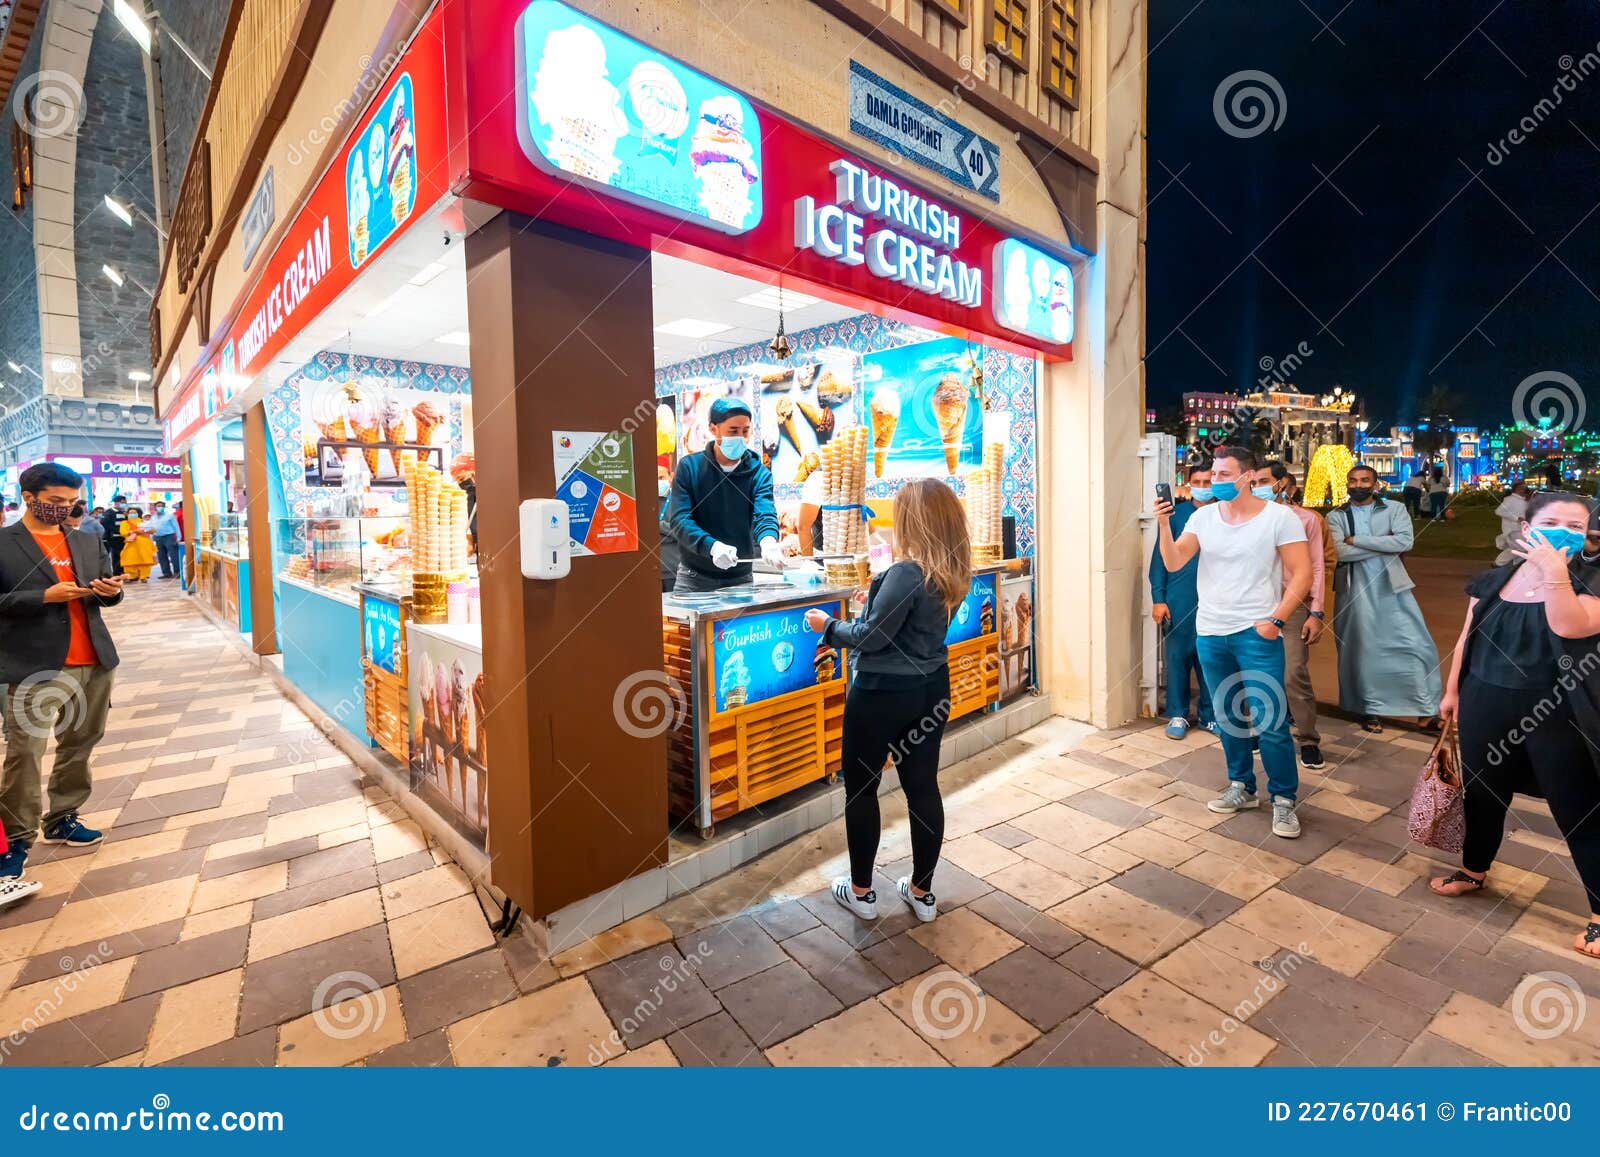 Shop Selling Turkish Ice Cream Famous for Its Funny Tricks and Jokes on  Customers Editorial Photo - Image of cool, city: 227670461